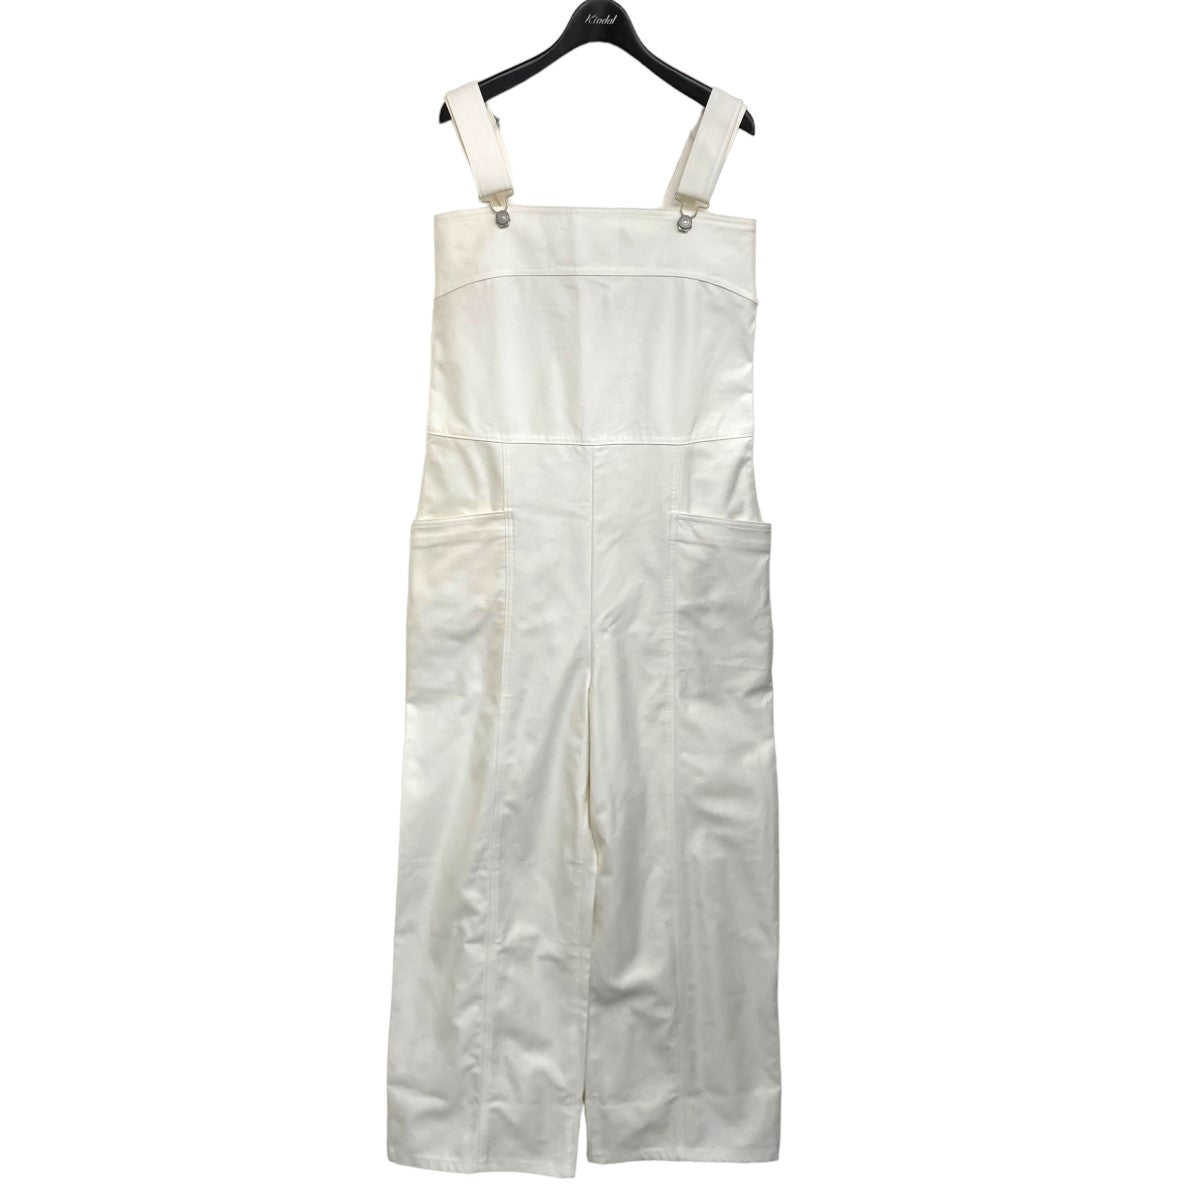 R．H．Vintage(ロンハーマンビンテージ) 「Back Satin Overall ...